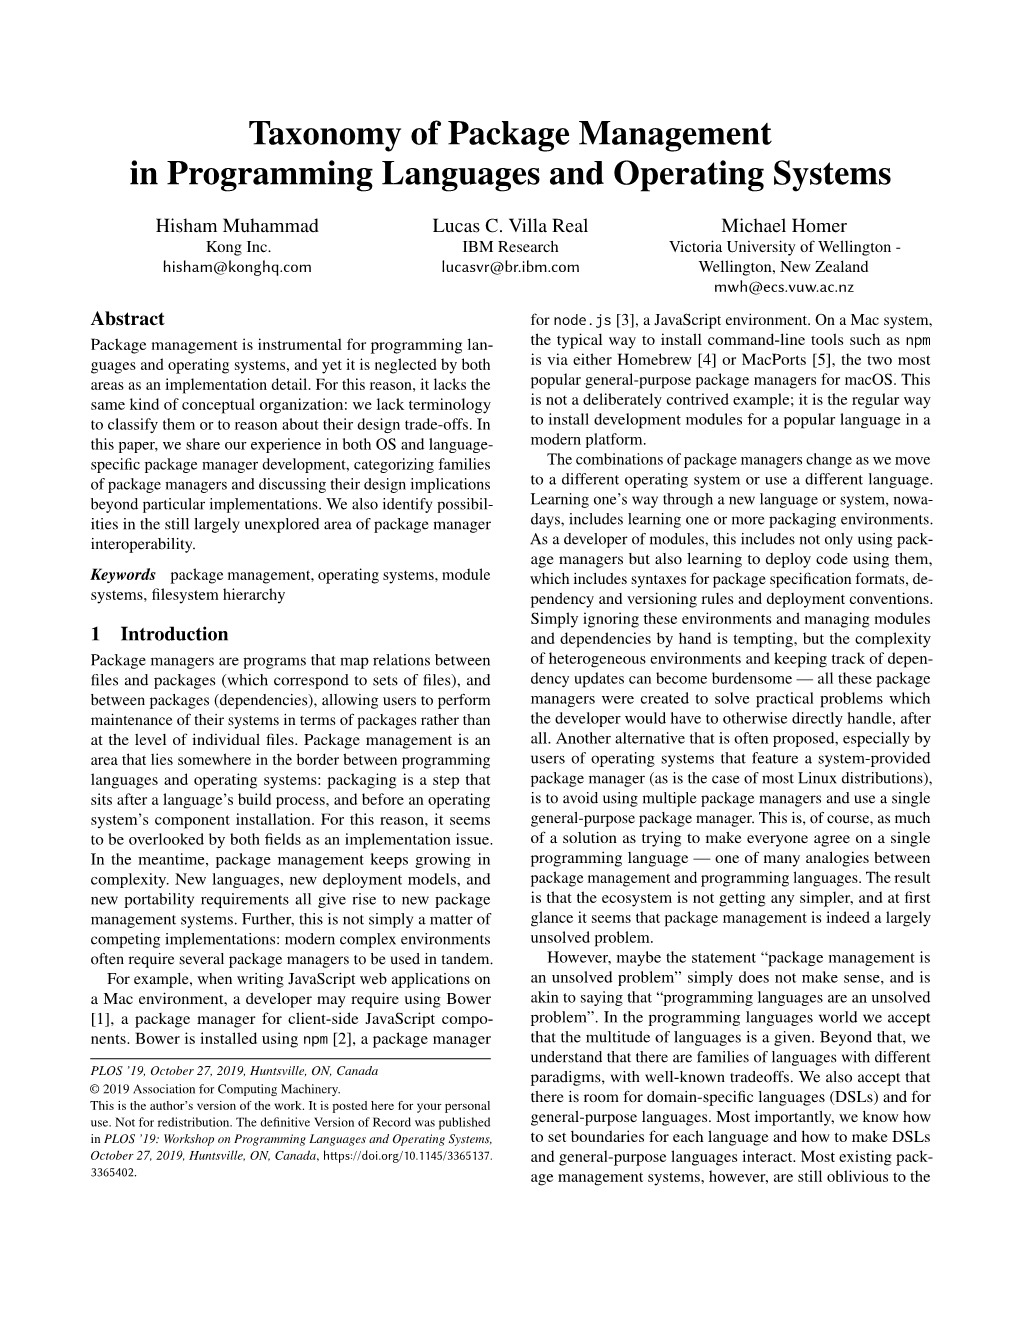 Taxonomy of Package Management in Programming Languages and Operating Systems